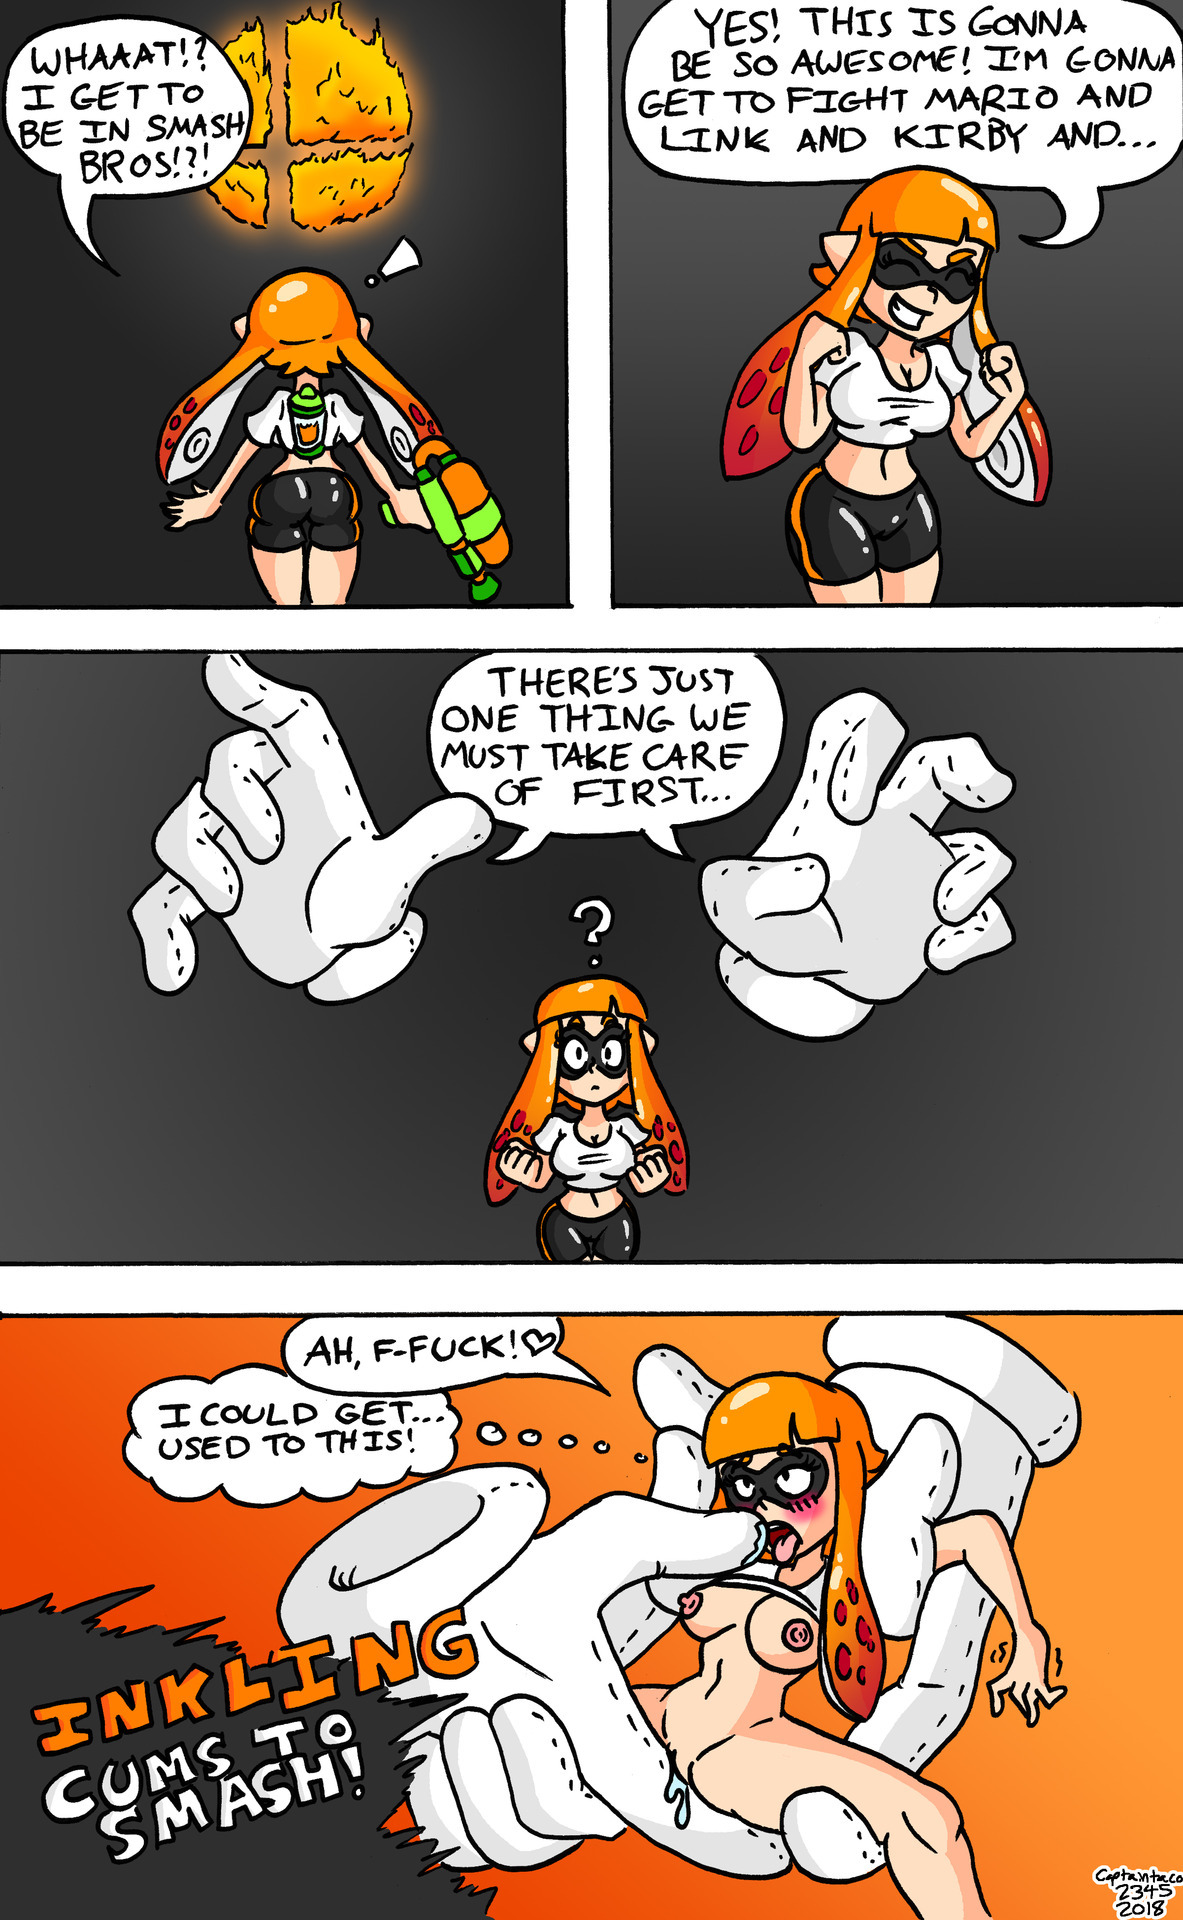 captaintaco2345-2: Inkling from Splatoon is gonna be in the new Smash Bros for the